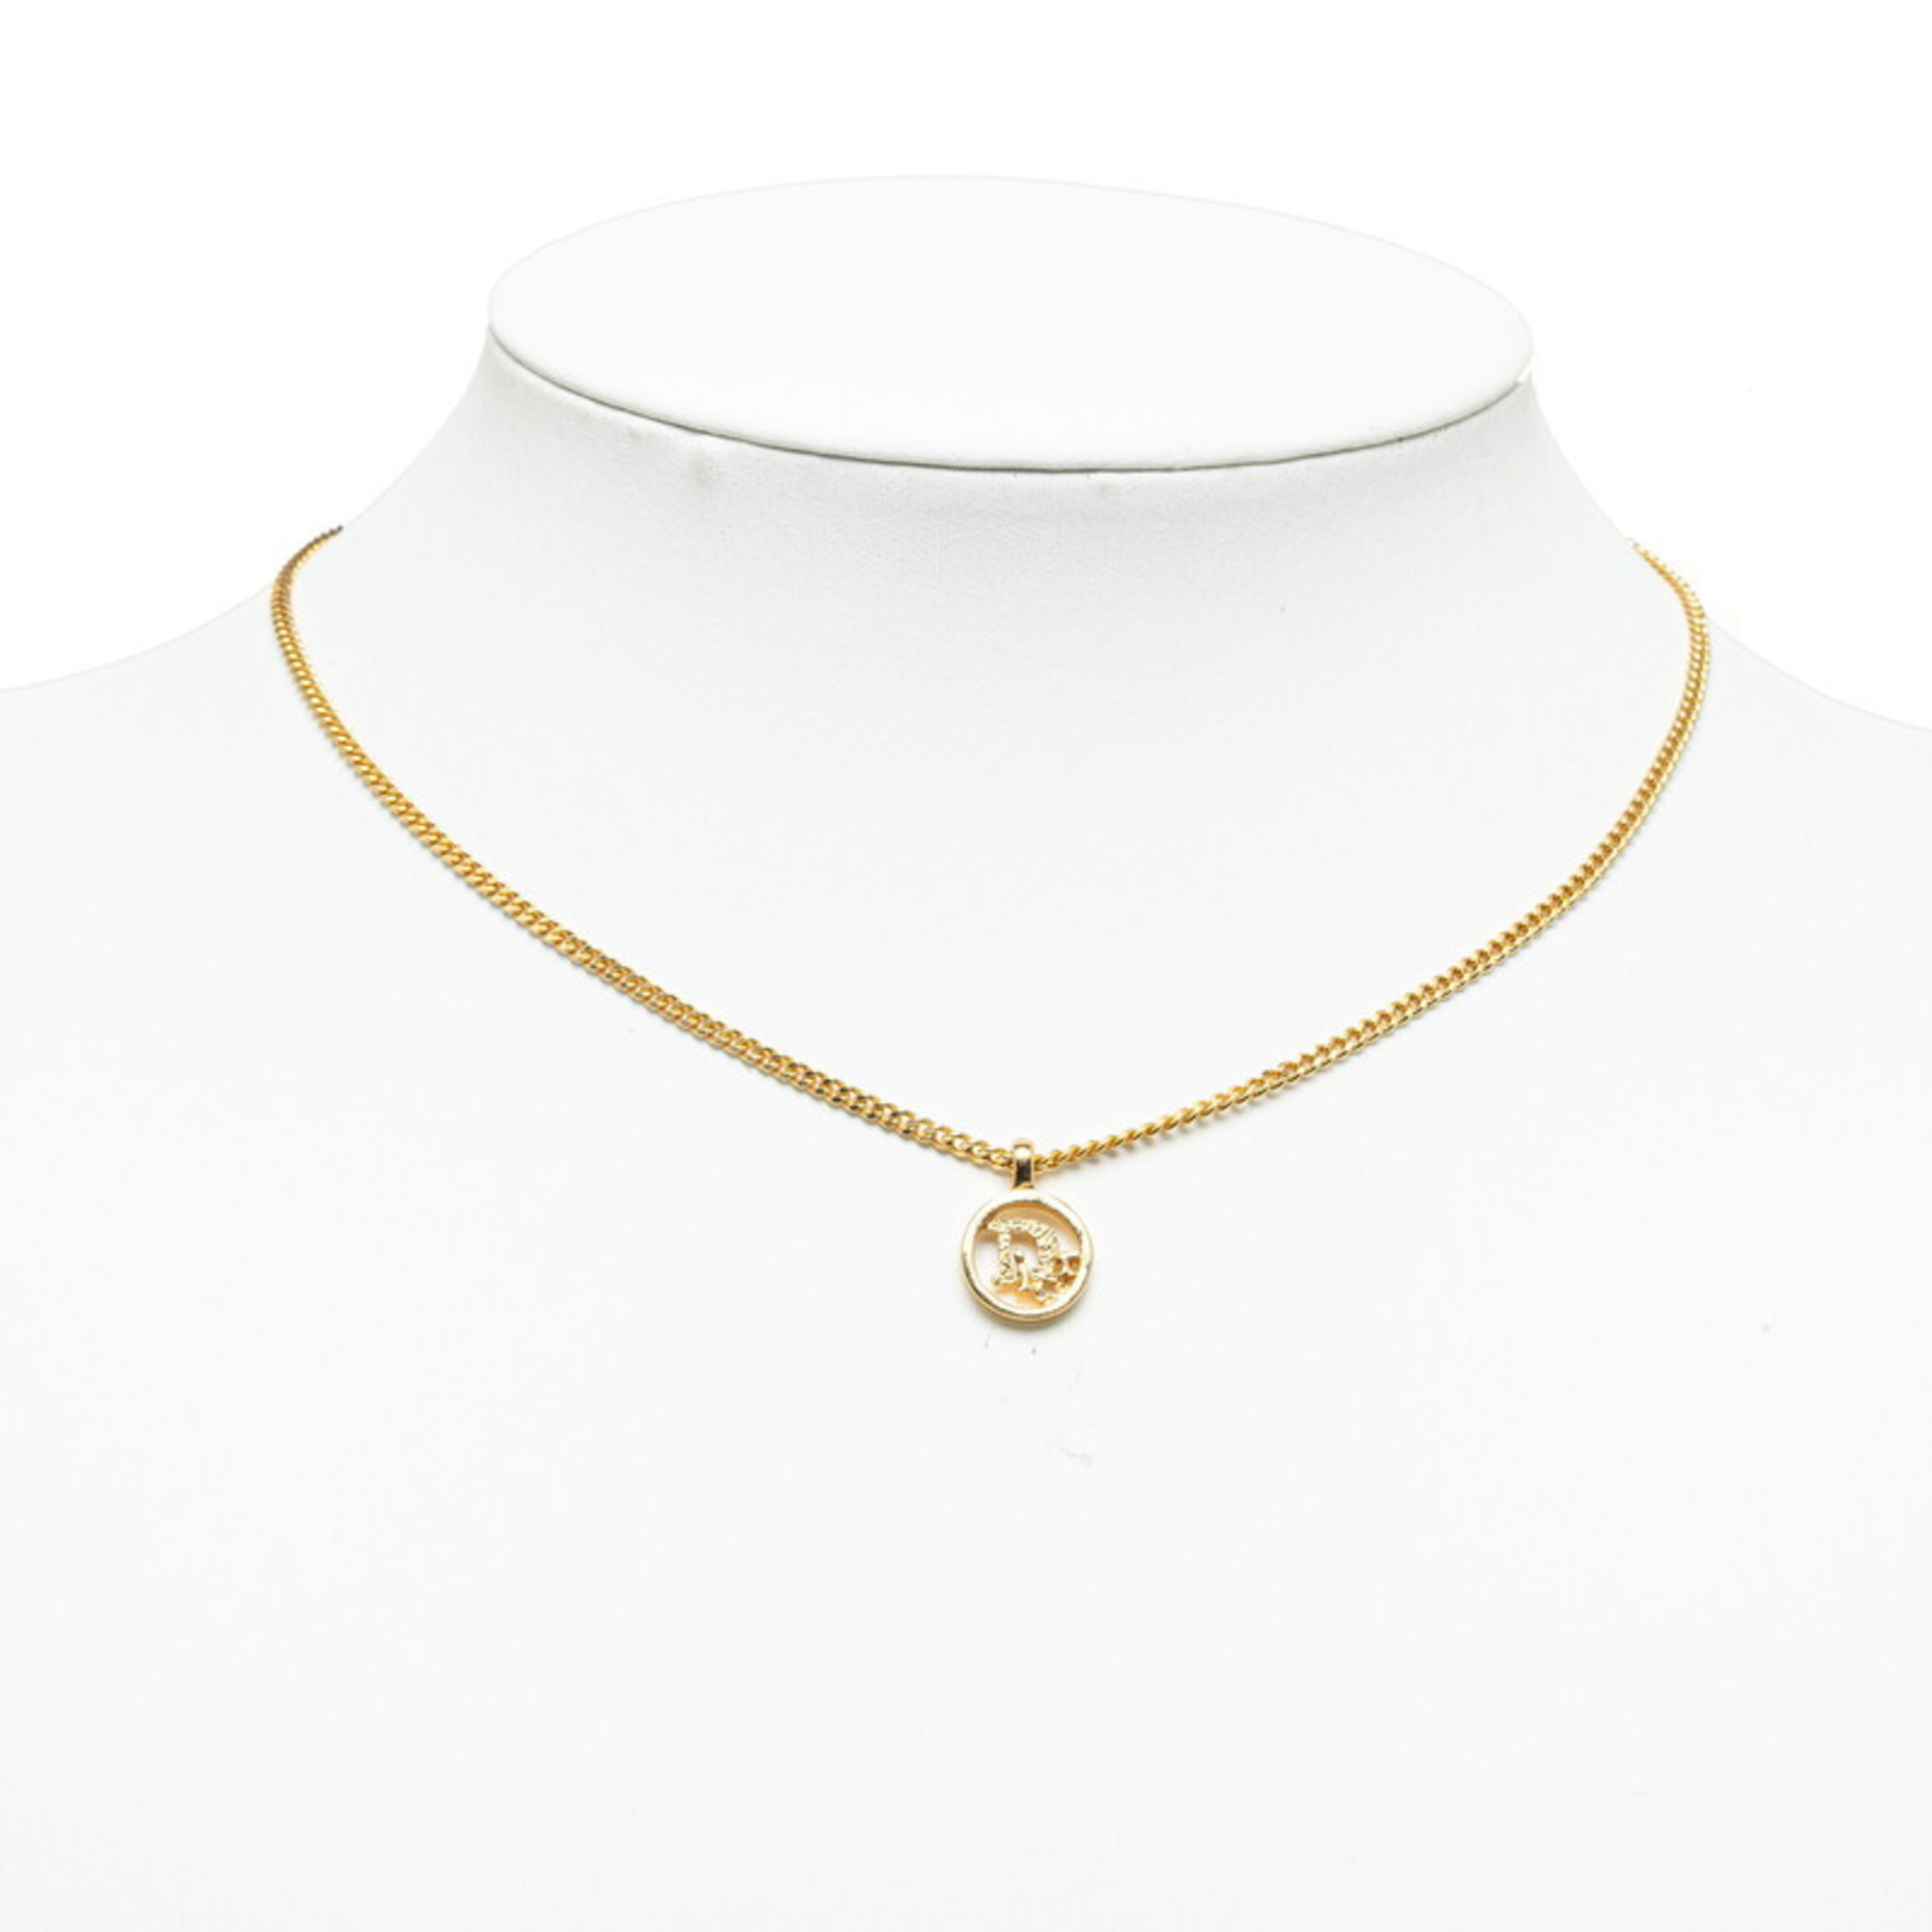 Christian Dior Dior Necklace Pendant Gold Plated Women's